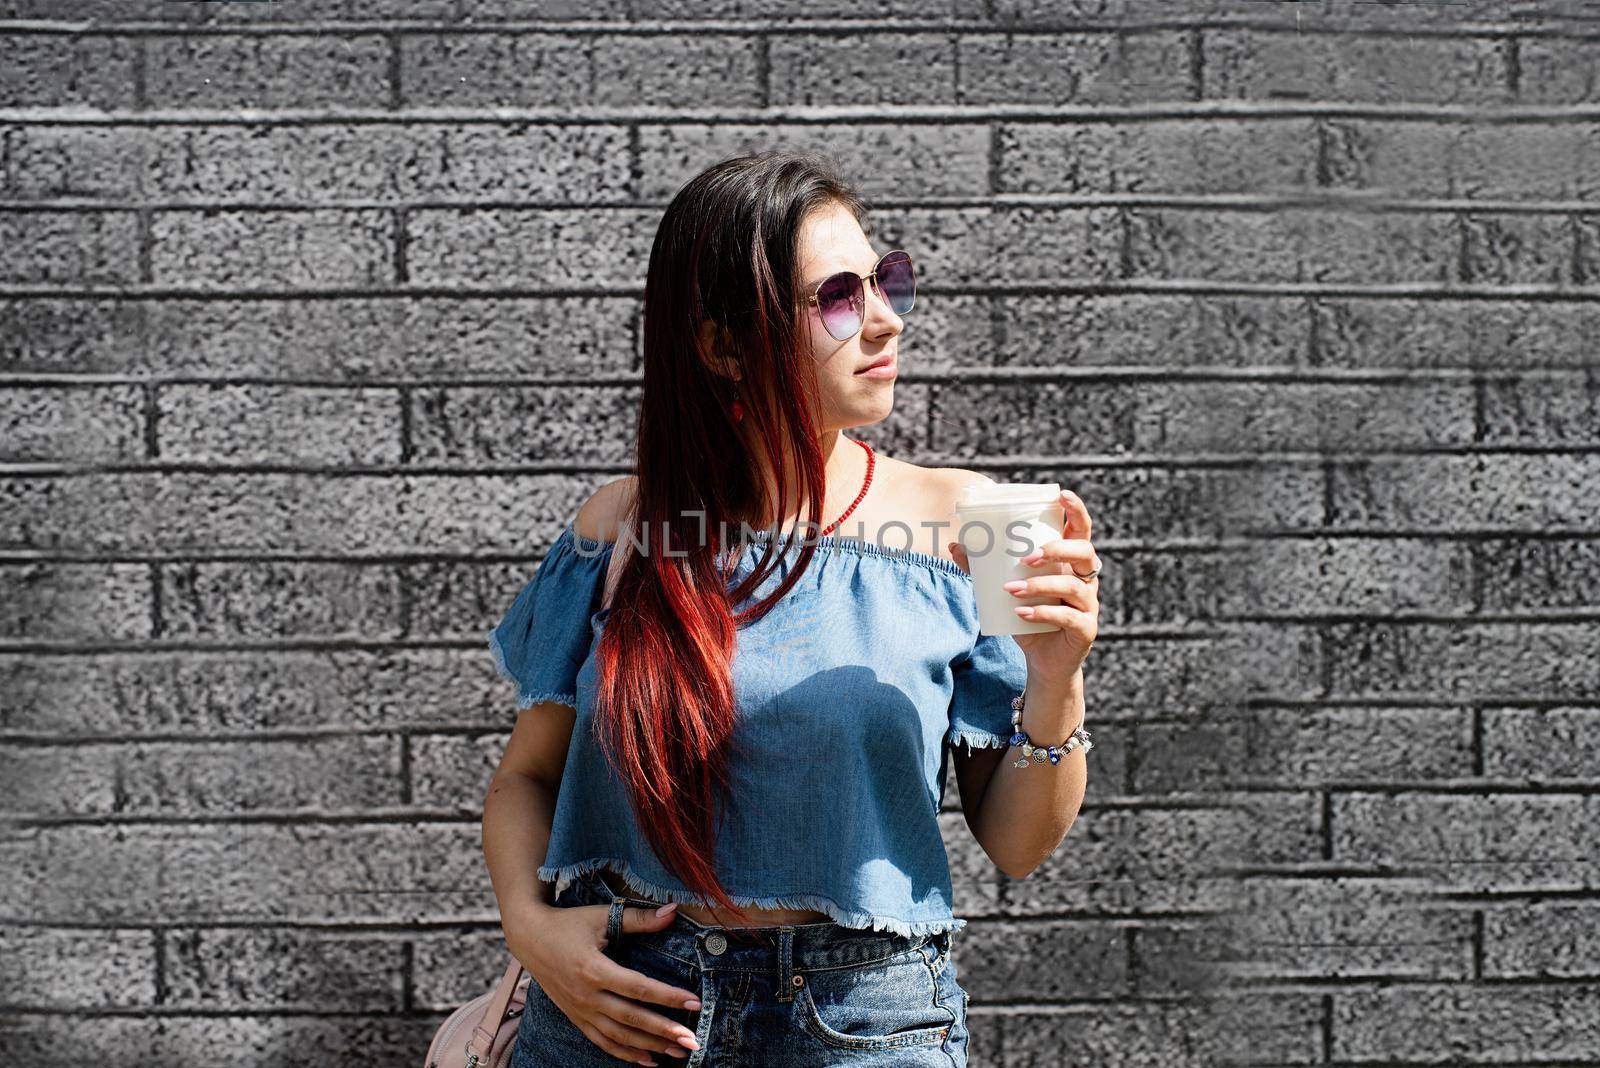 stylish young woman wearing jeans shirt, sunglasses and bag, drinking coffee to go at street, black brick wall background by Desperada